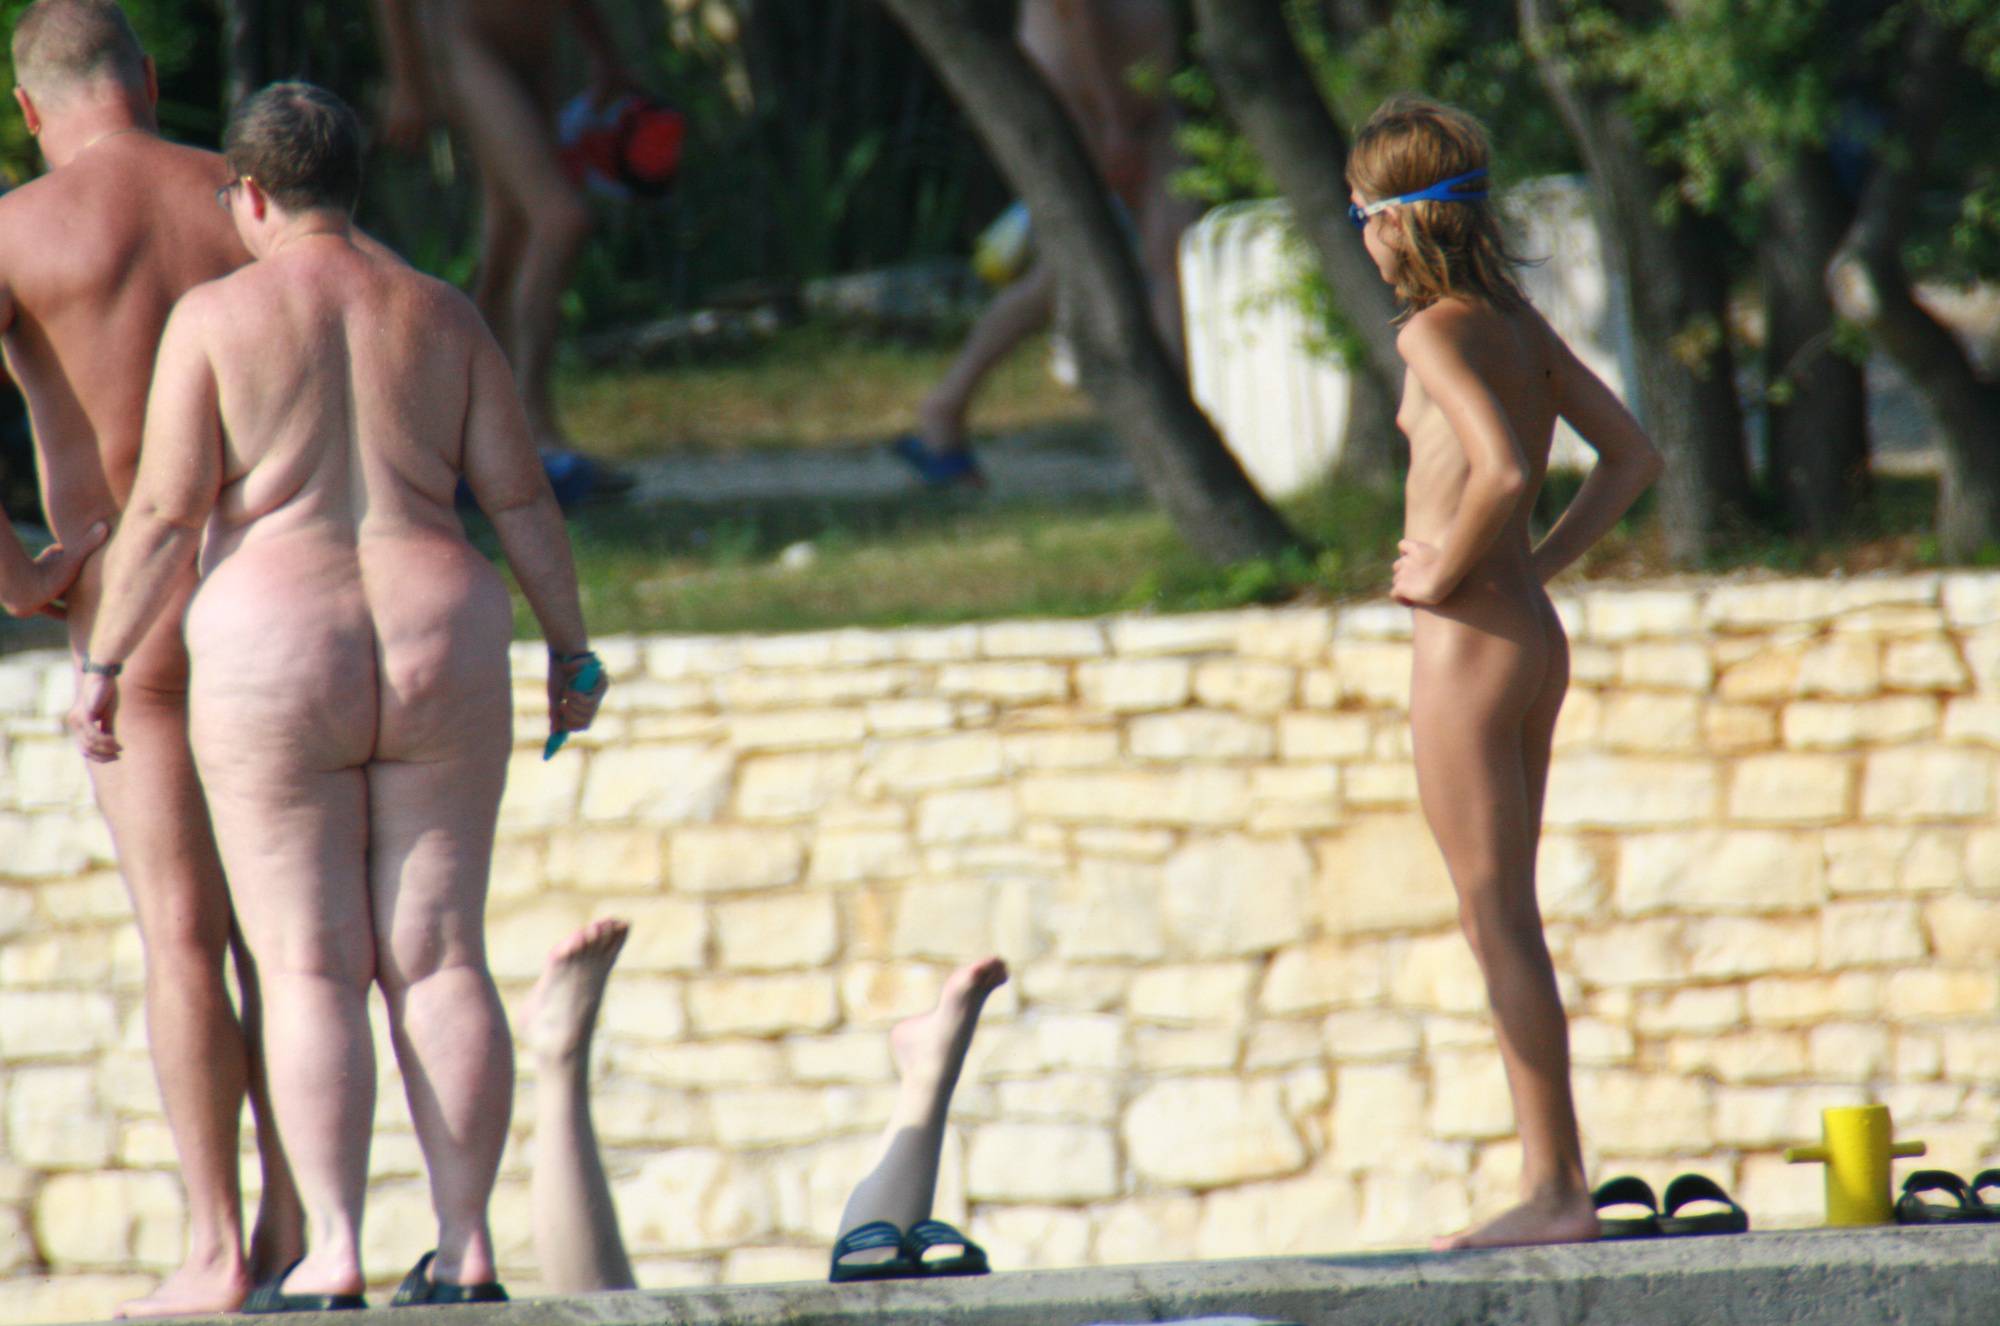 Pure Nudism Images Early Nudist Member Day - 3